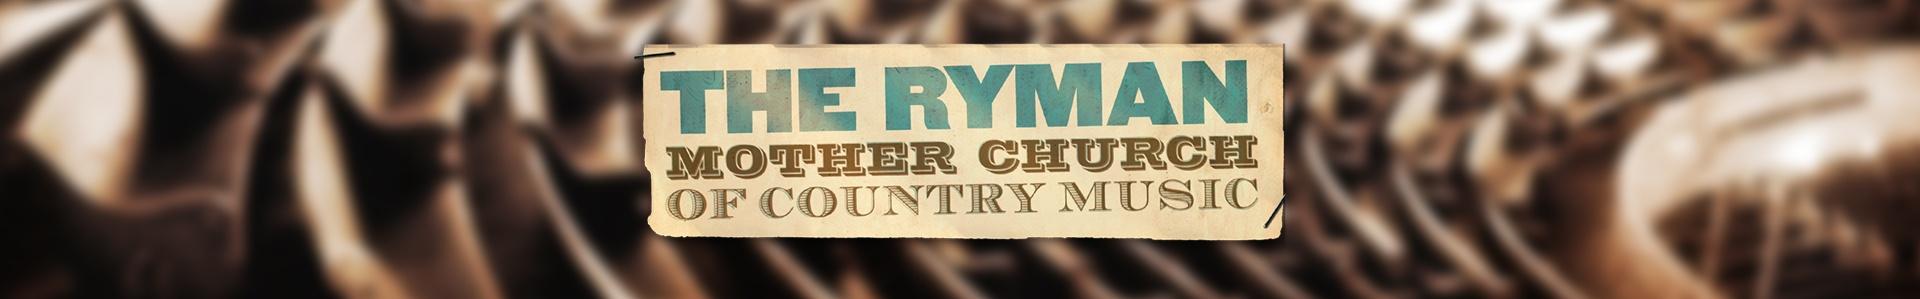 The Ryman: Mother Church of Country Music